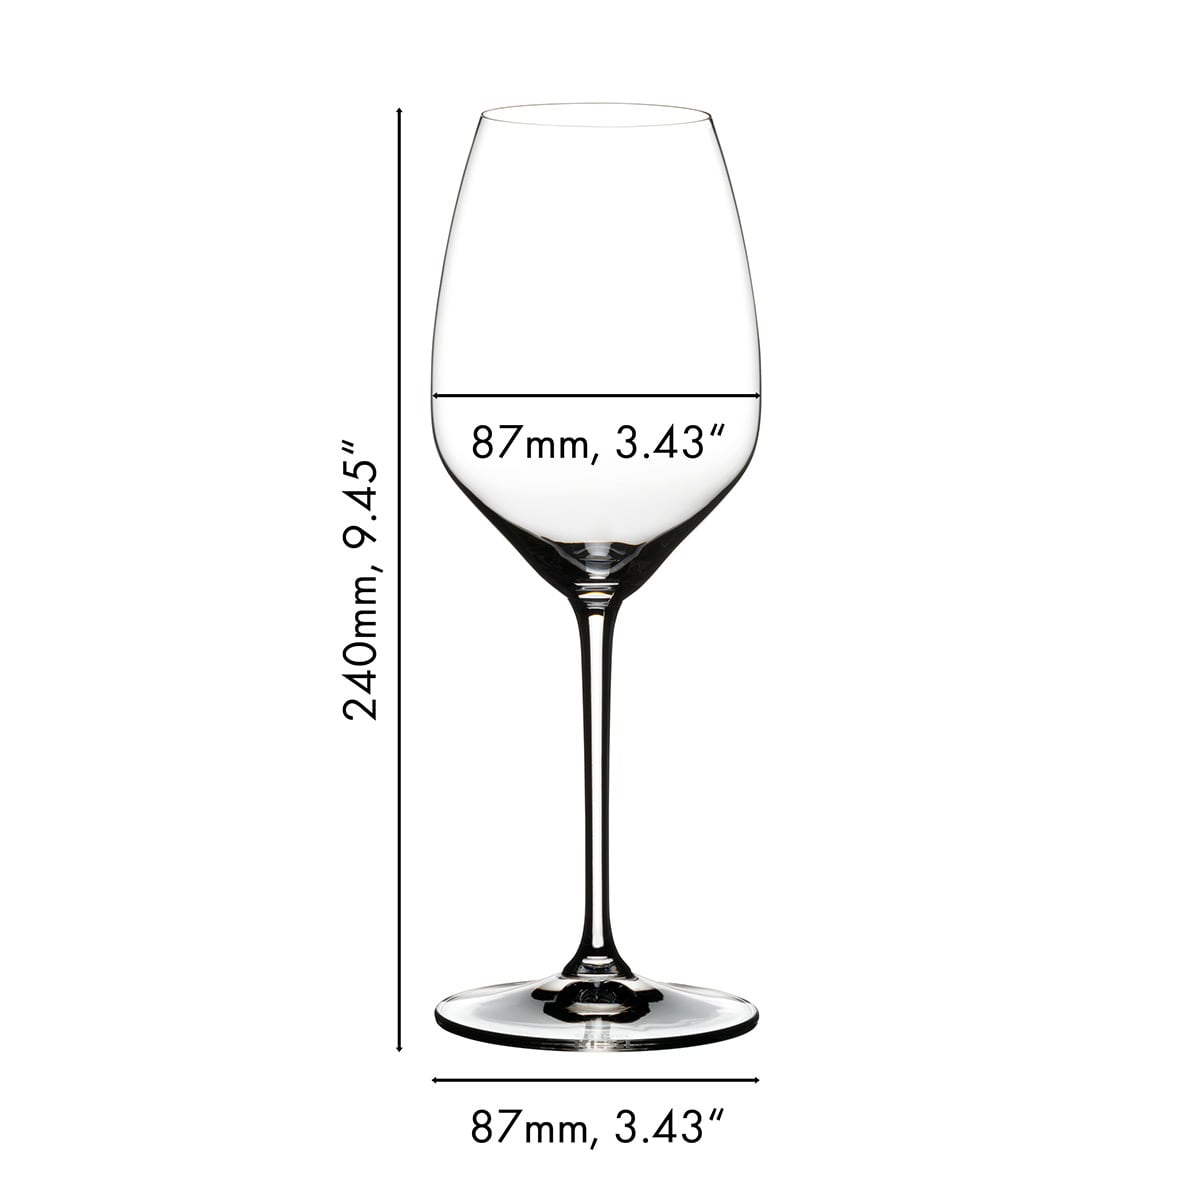 Personalized Riedel Wine Glasses, Riesling/White Wine - Set of 4 